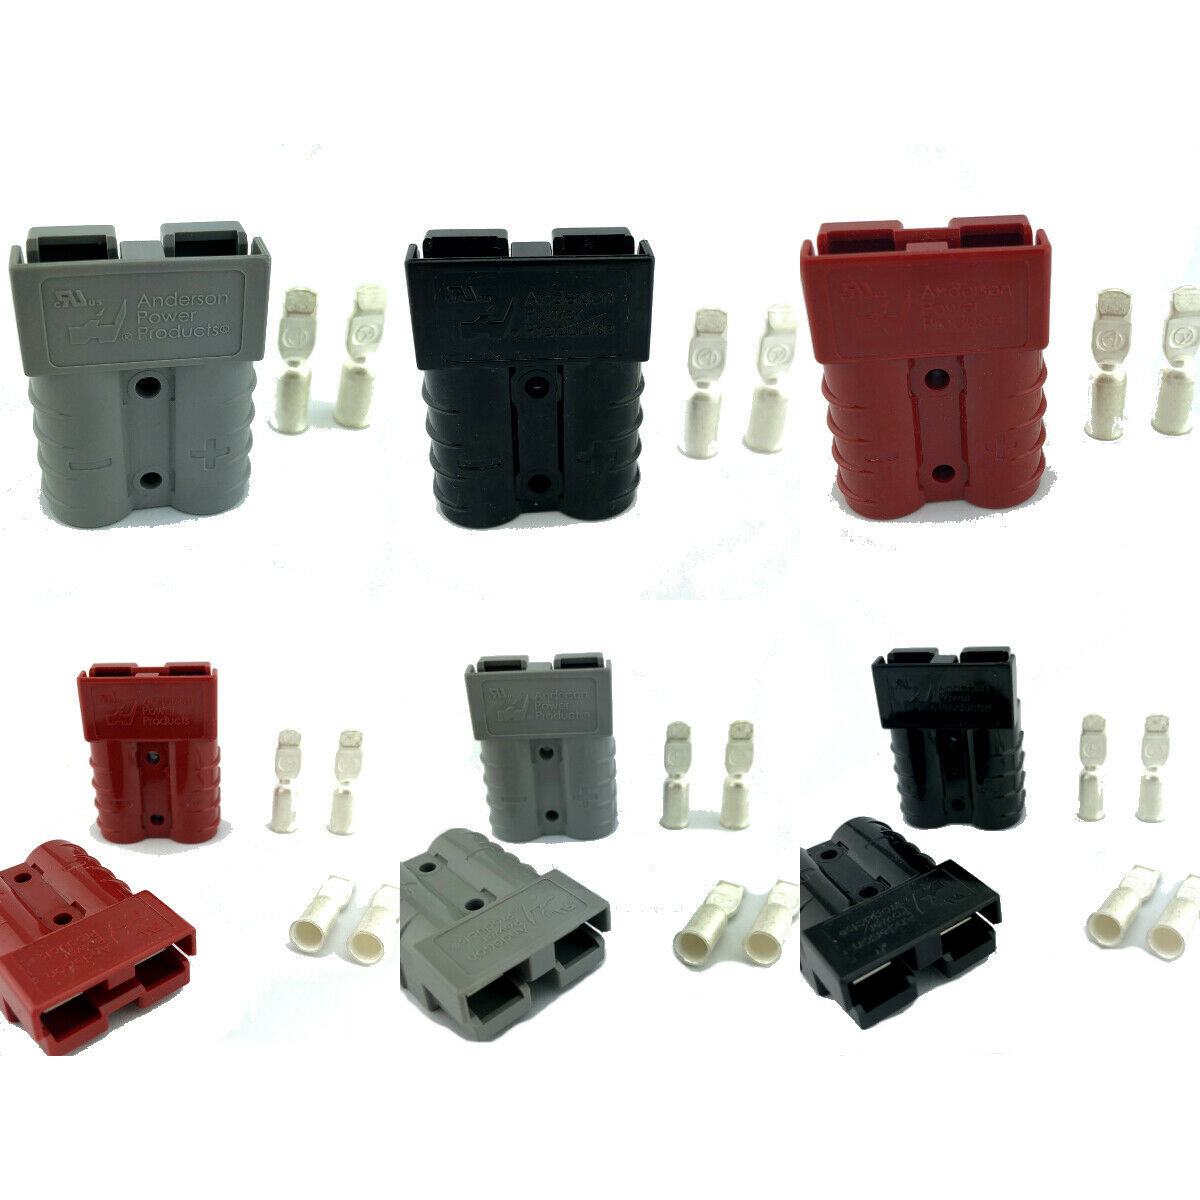 Anderson Sb50 Connector Set Cable Wire Quick Connect Battery Plug Kit